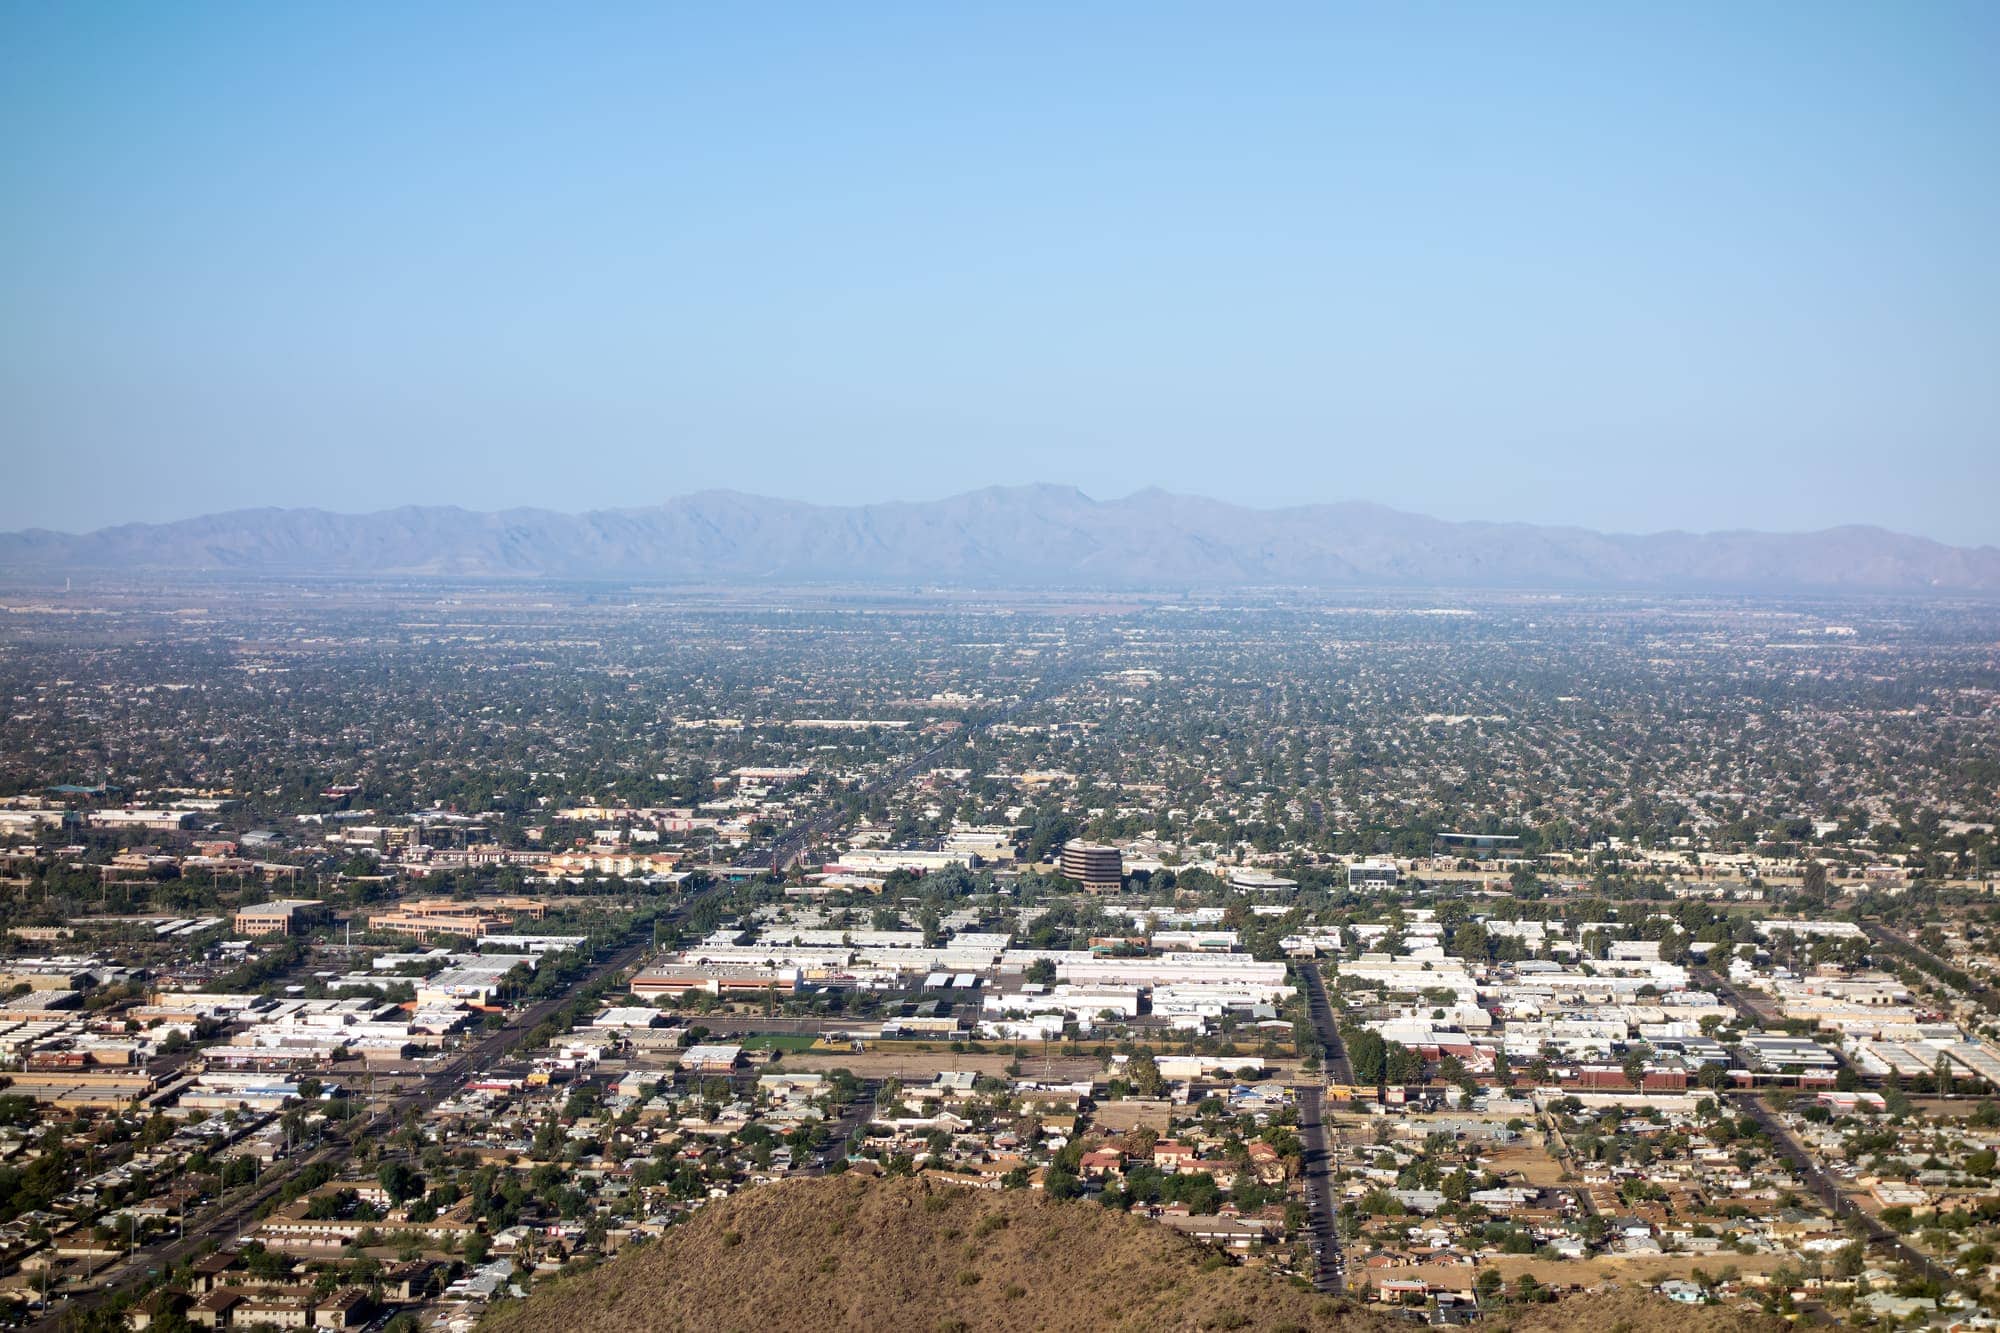 https://exprealty.com/wp-content/uploads/These-Are-the-6-Best-Neighborhoods-in-Glendale-AZ.jpg